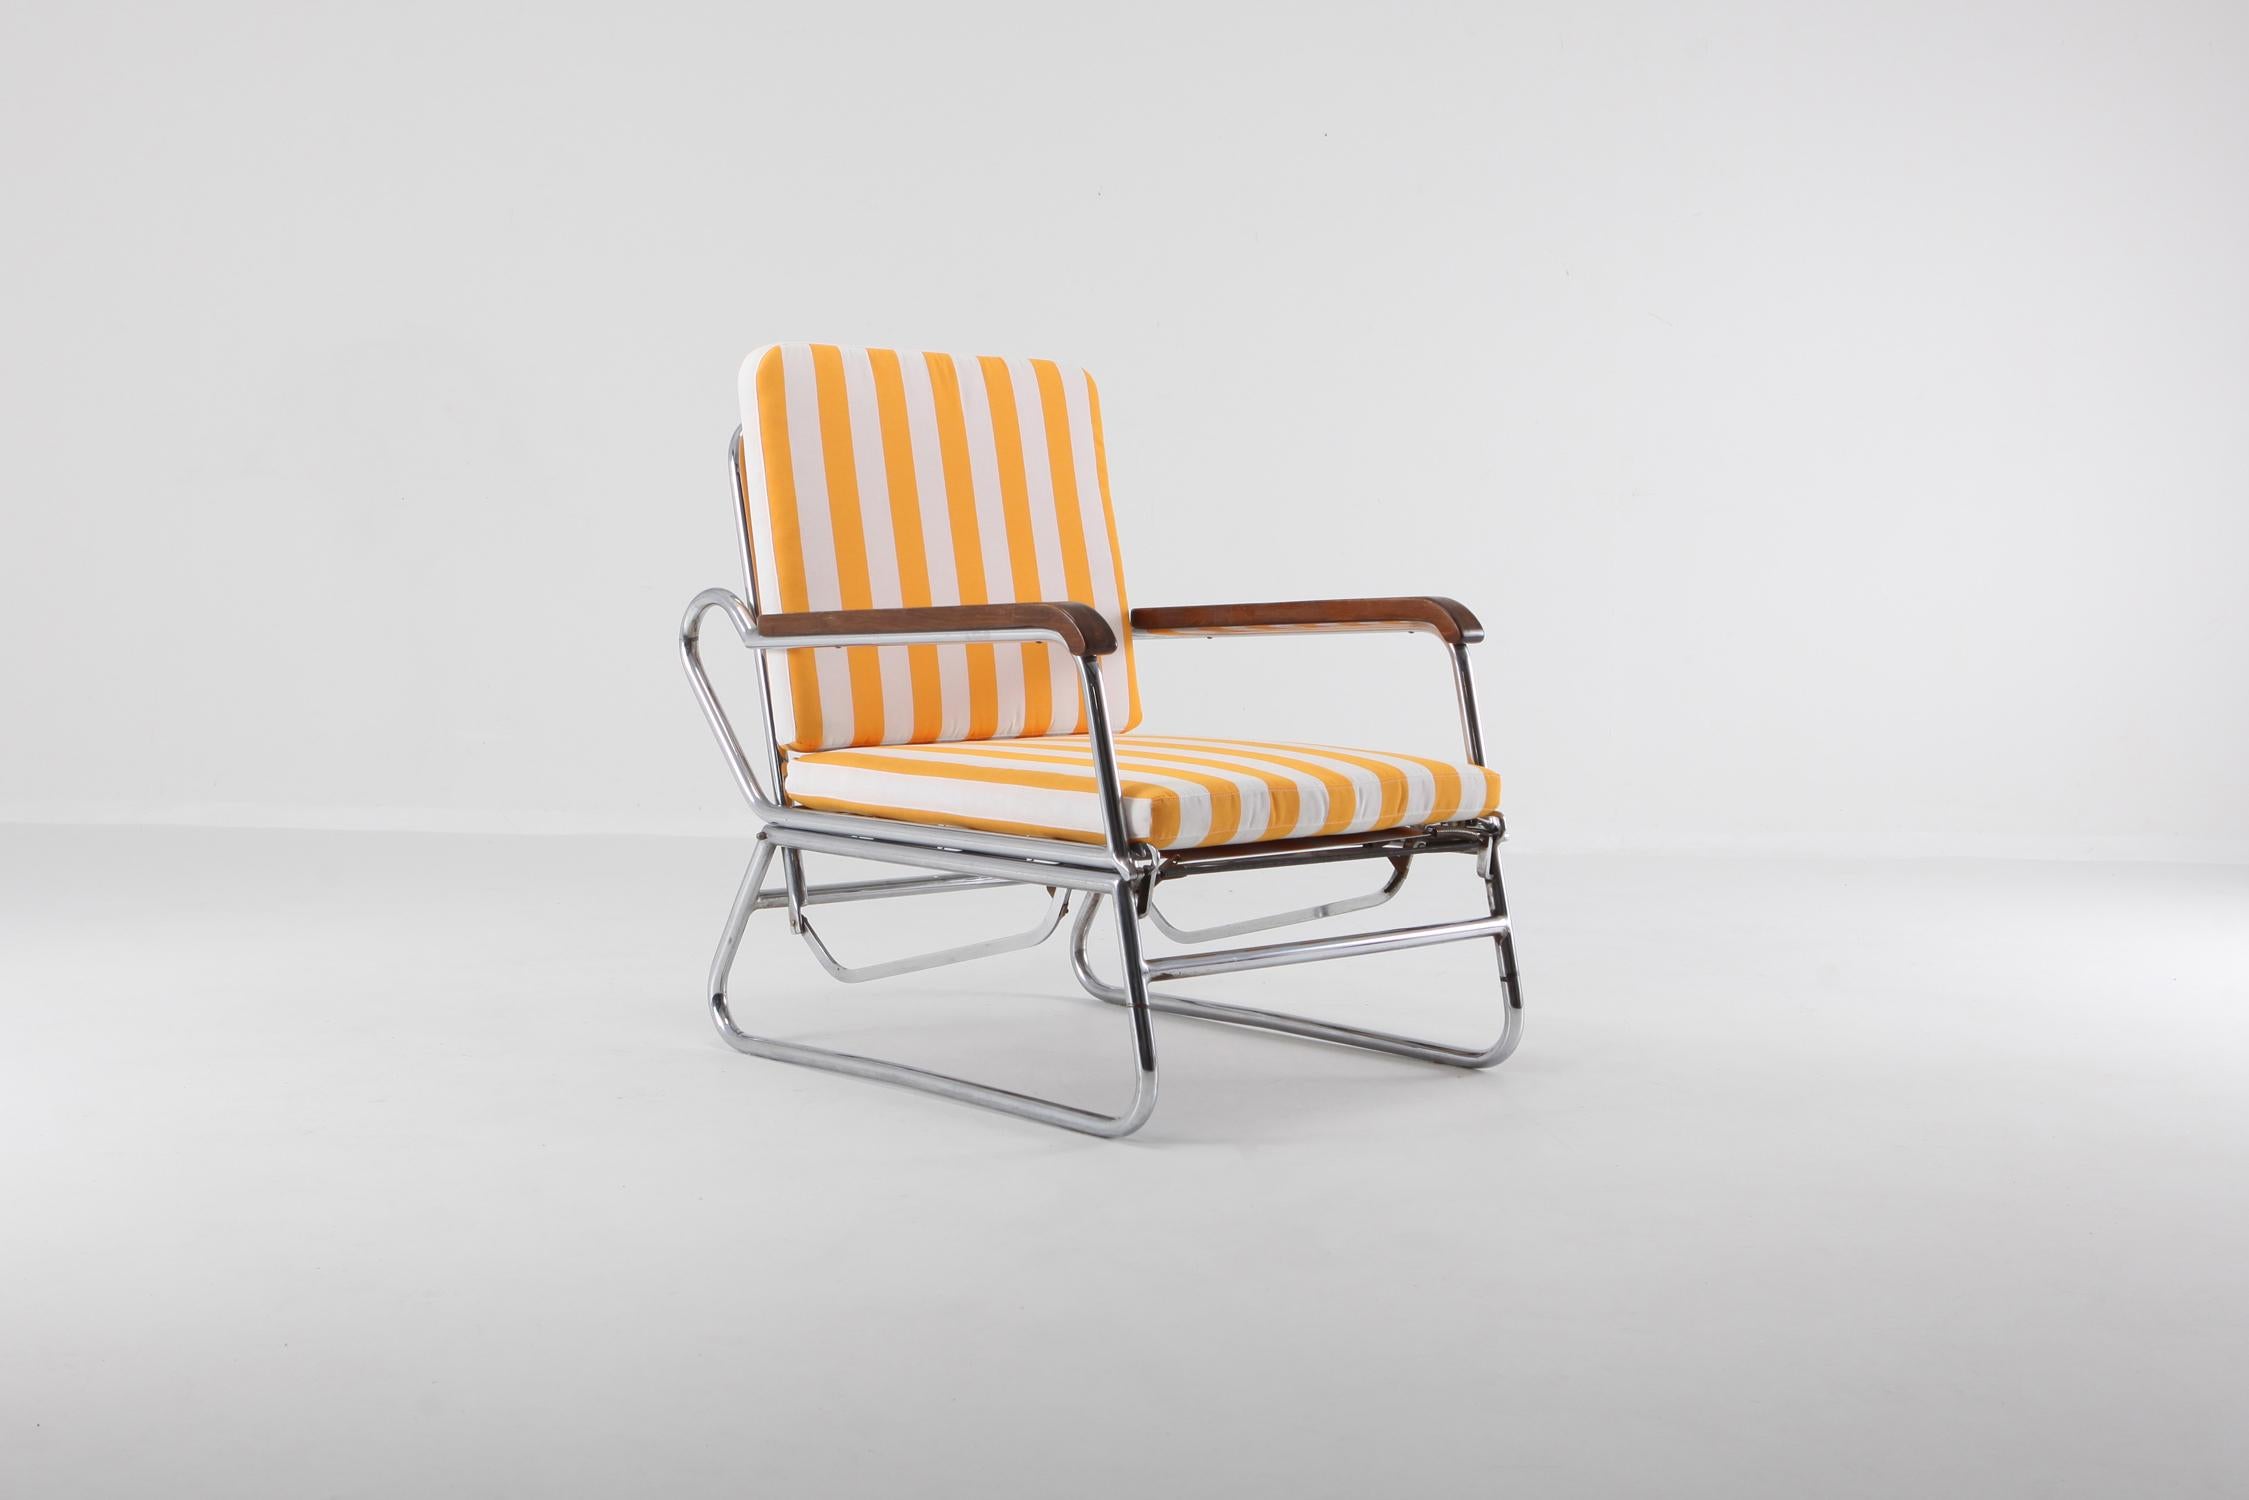 Bauhaus style chaise longue in tubular chromed steel, mahogany armrests and newly upholstered yellow and white striped cushions. The color of the fabric was inspired by the Giorgio Armani Beverly Hills perfume collection. Typical of 1950s and 1980s